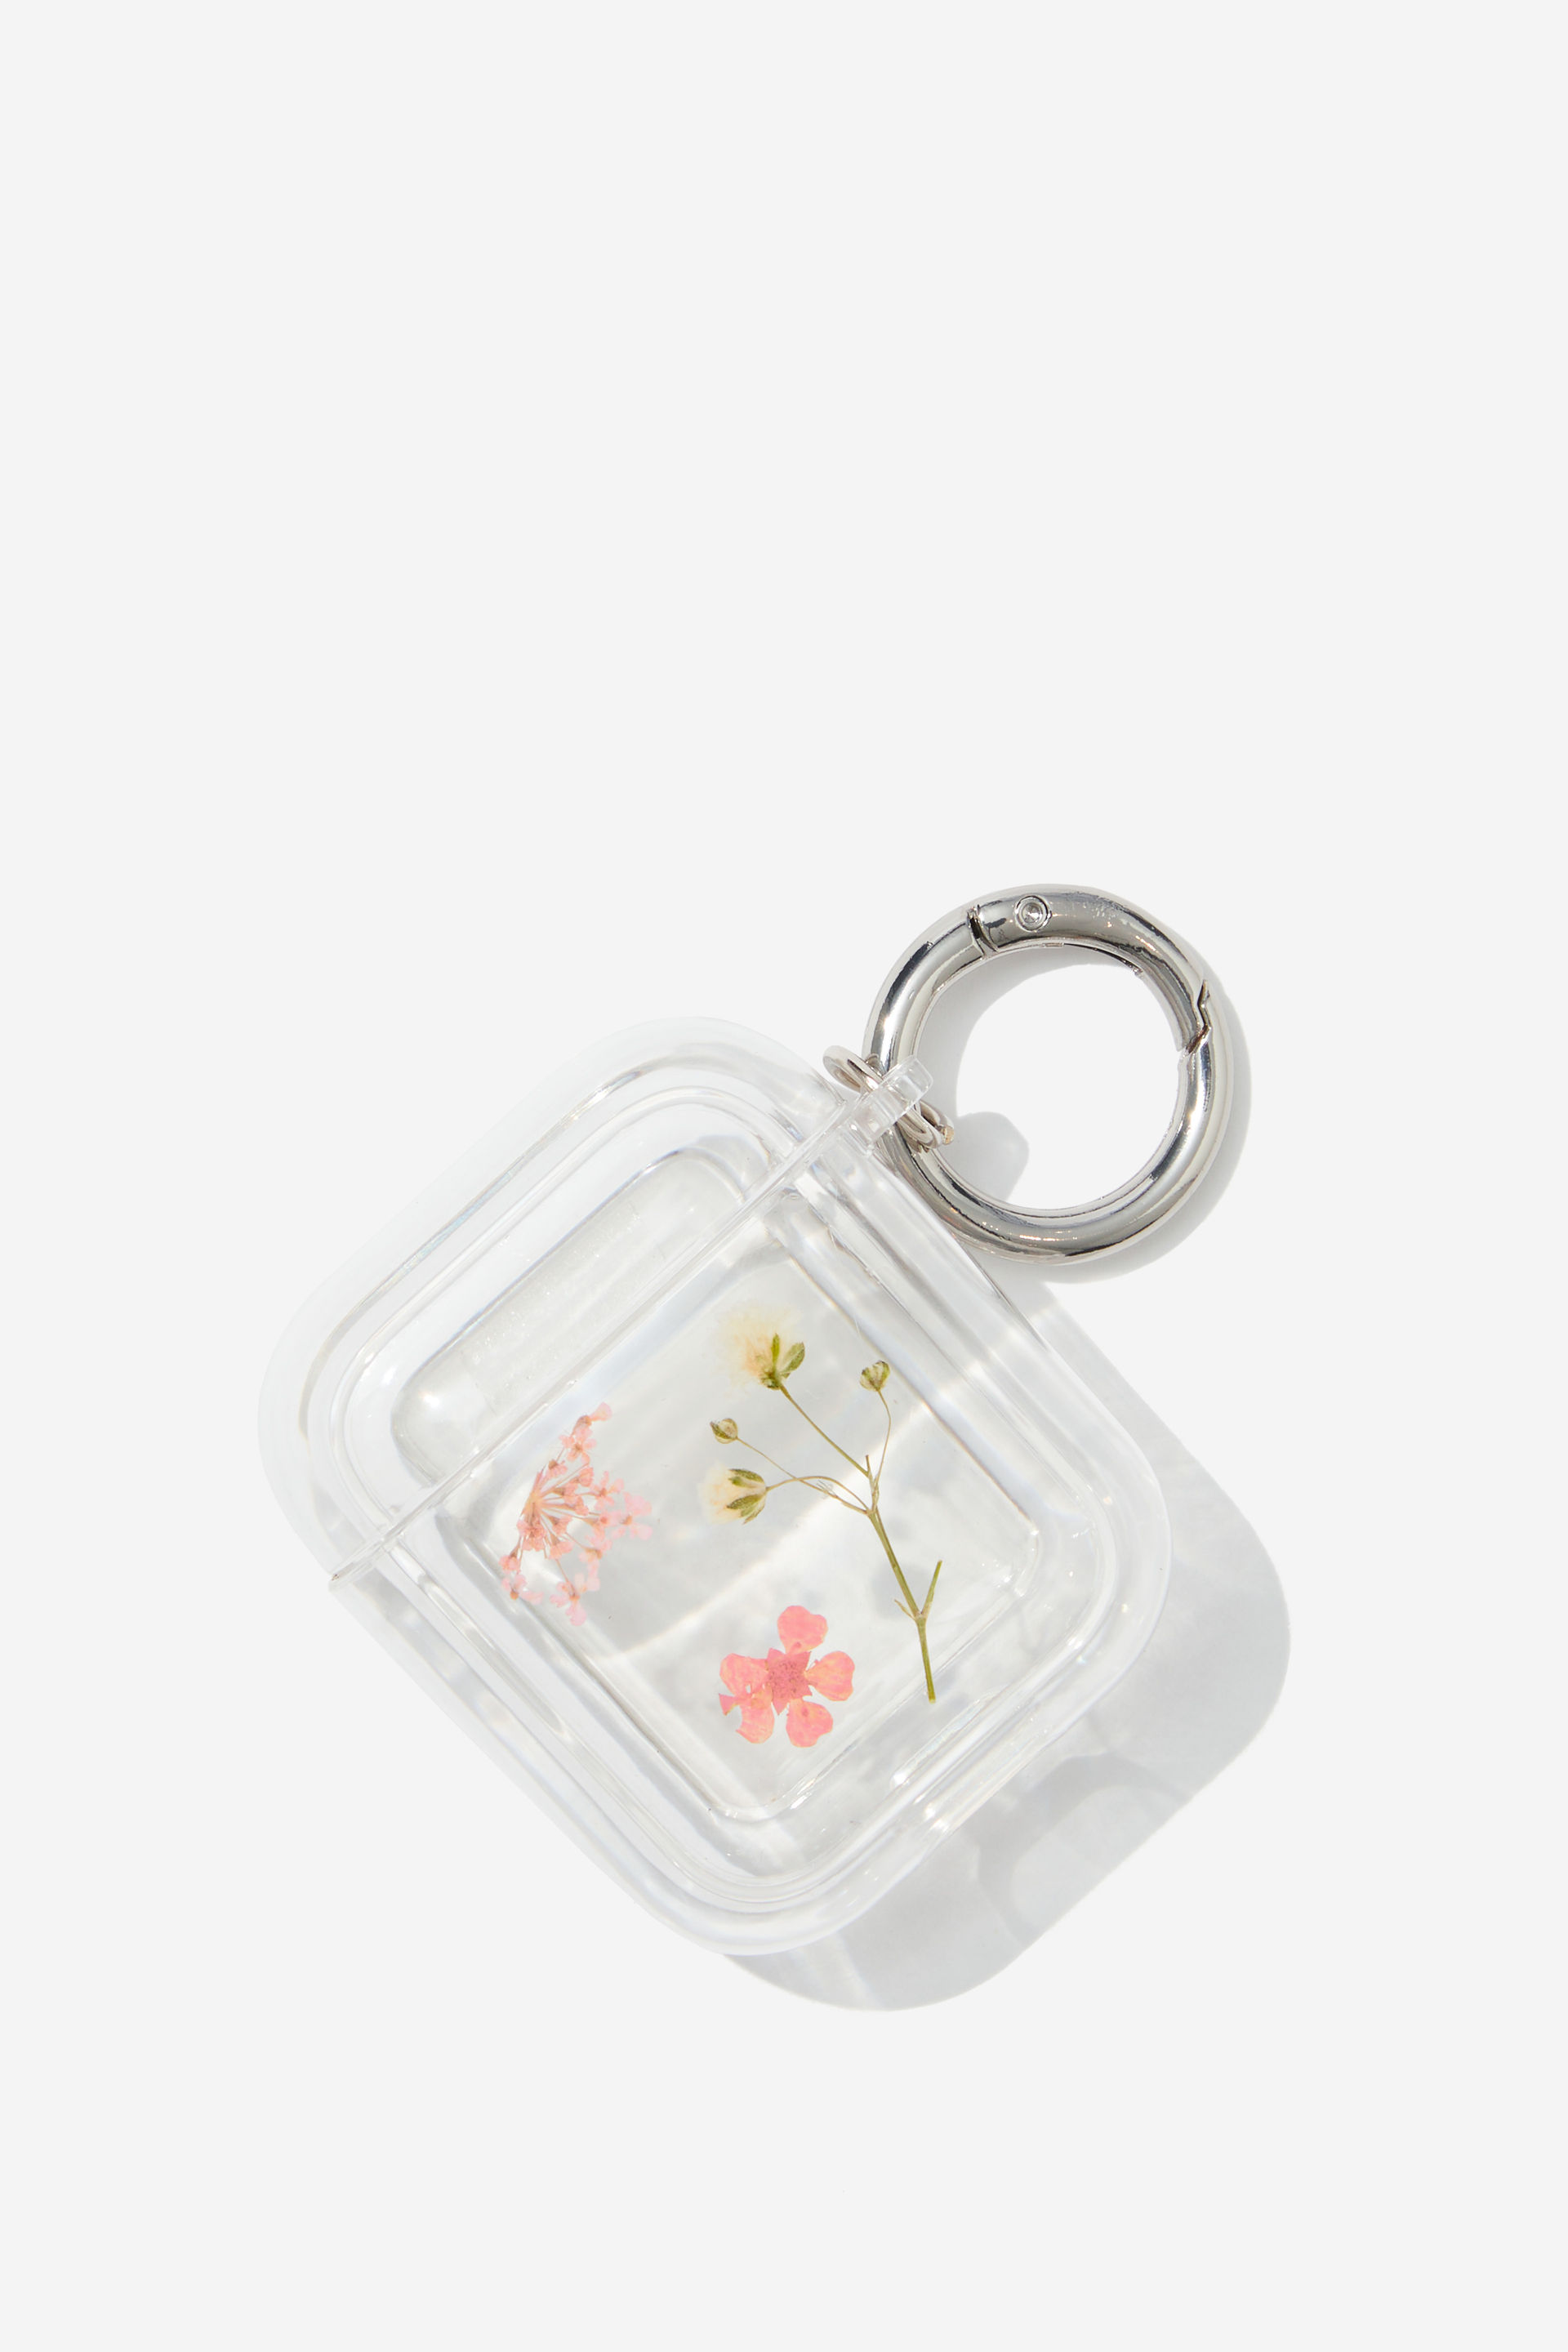 Typo - Earbud Case Gen 1 & 2 - Trapped pink micro flower